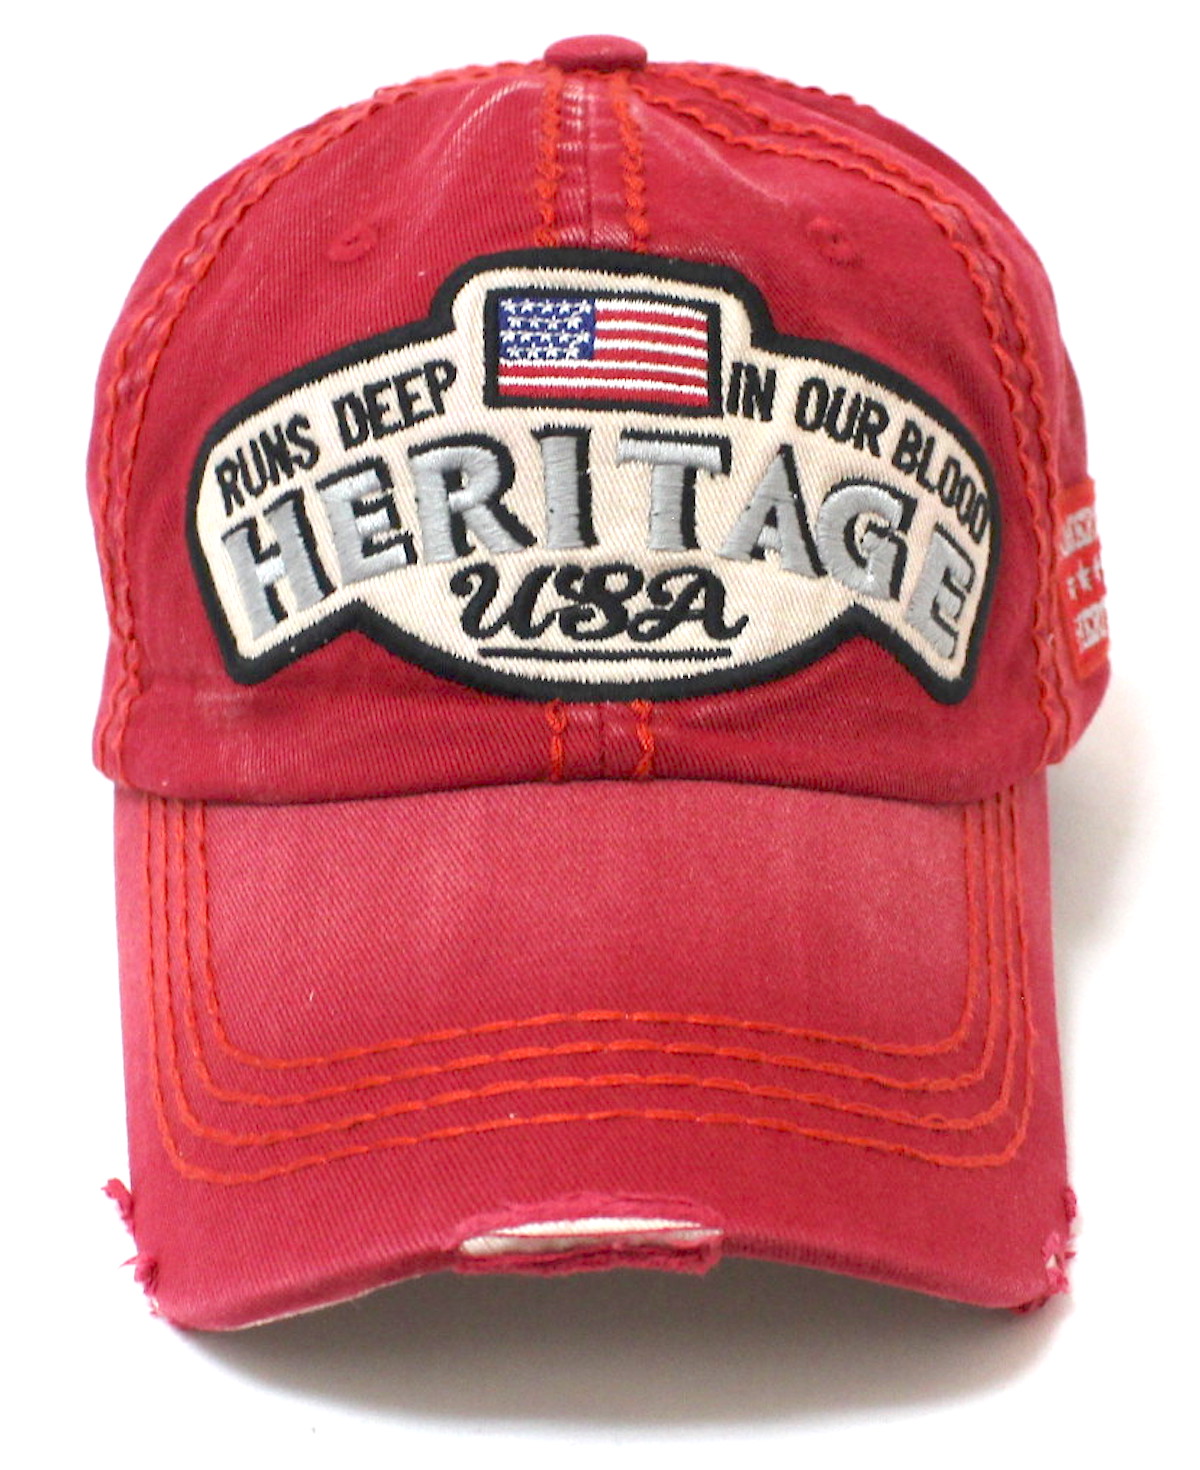 HeritageUSA_Red_Front